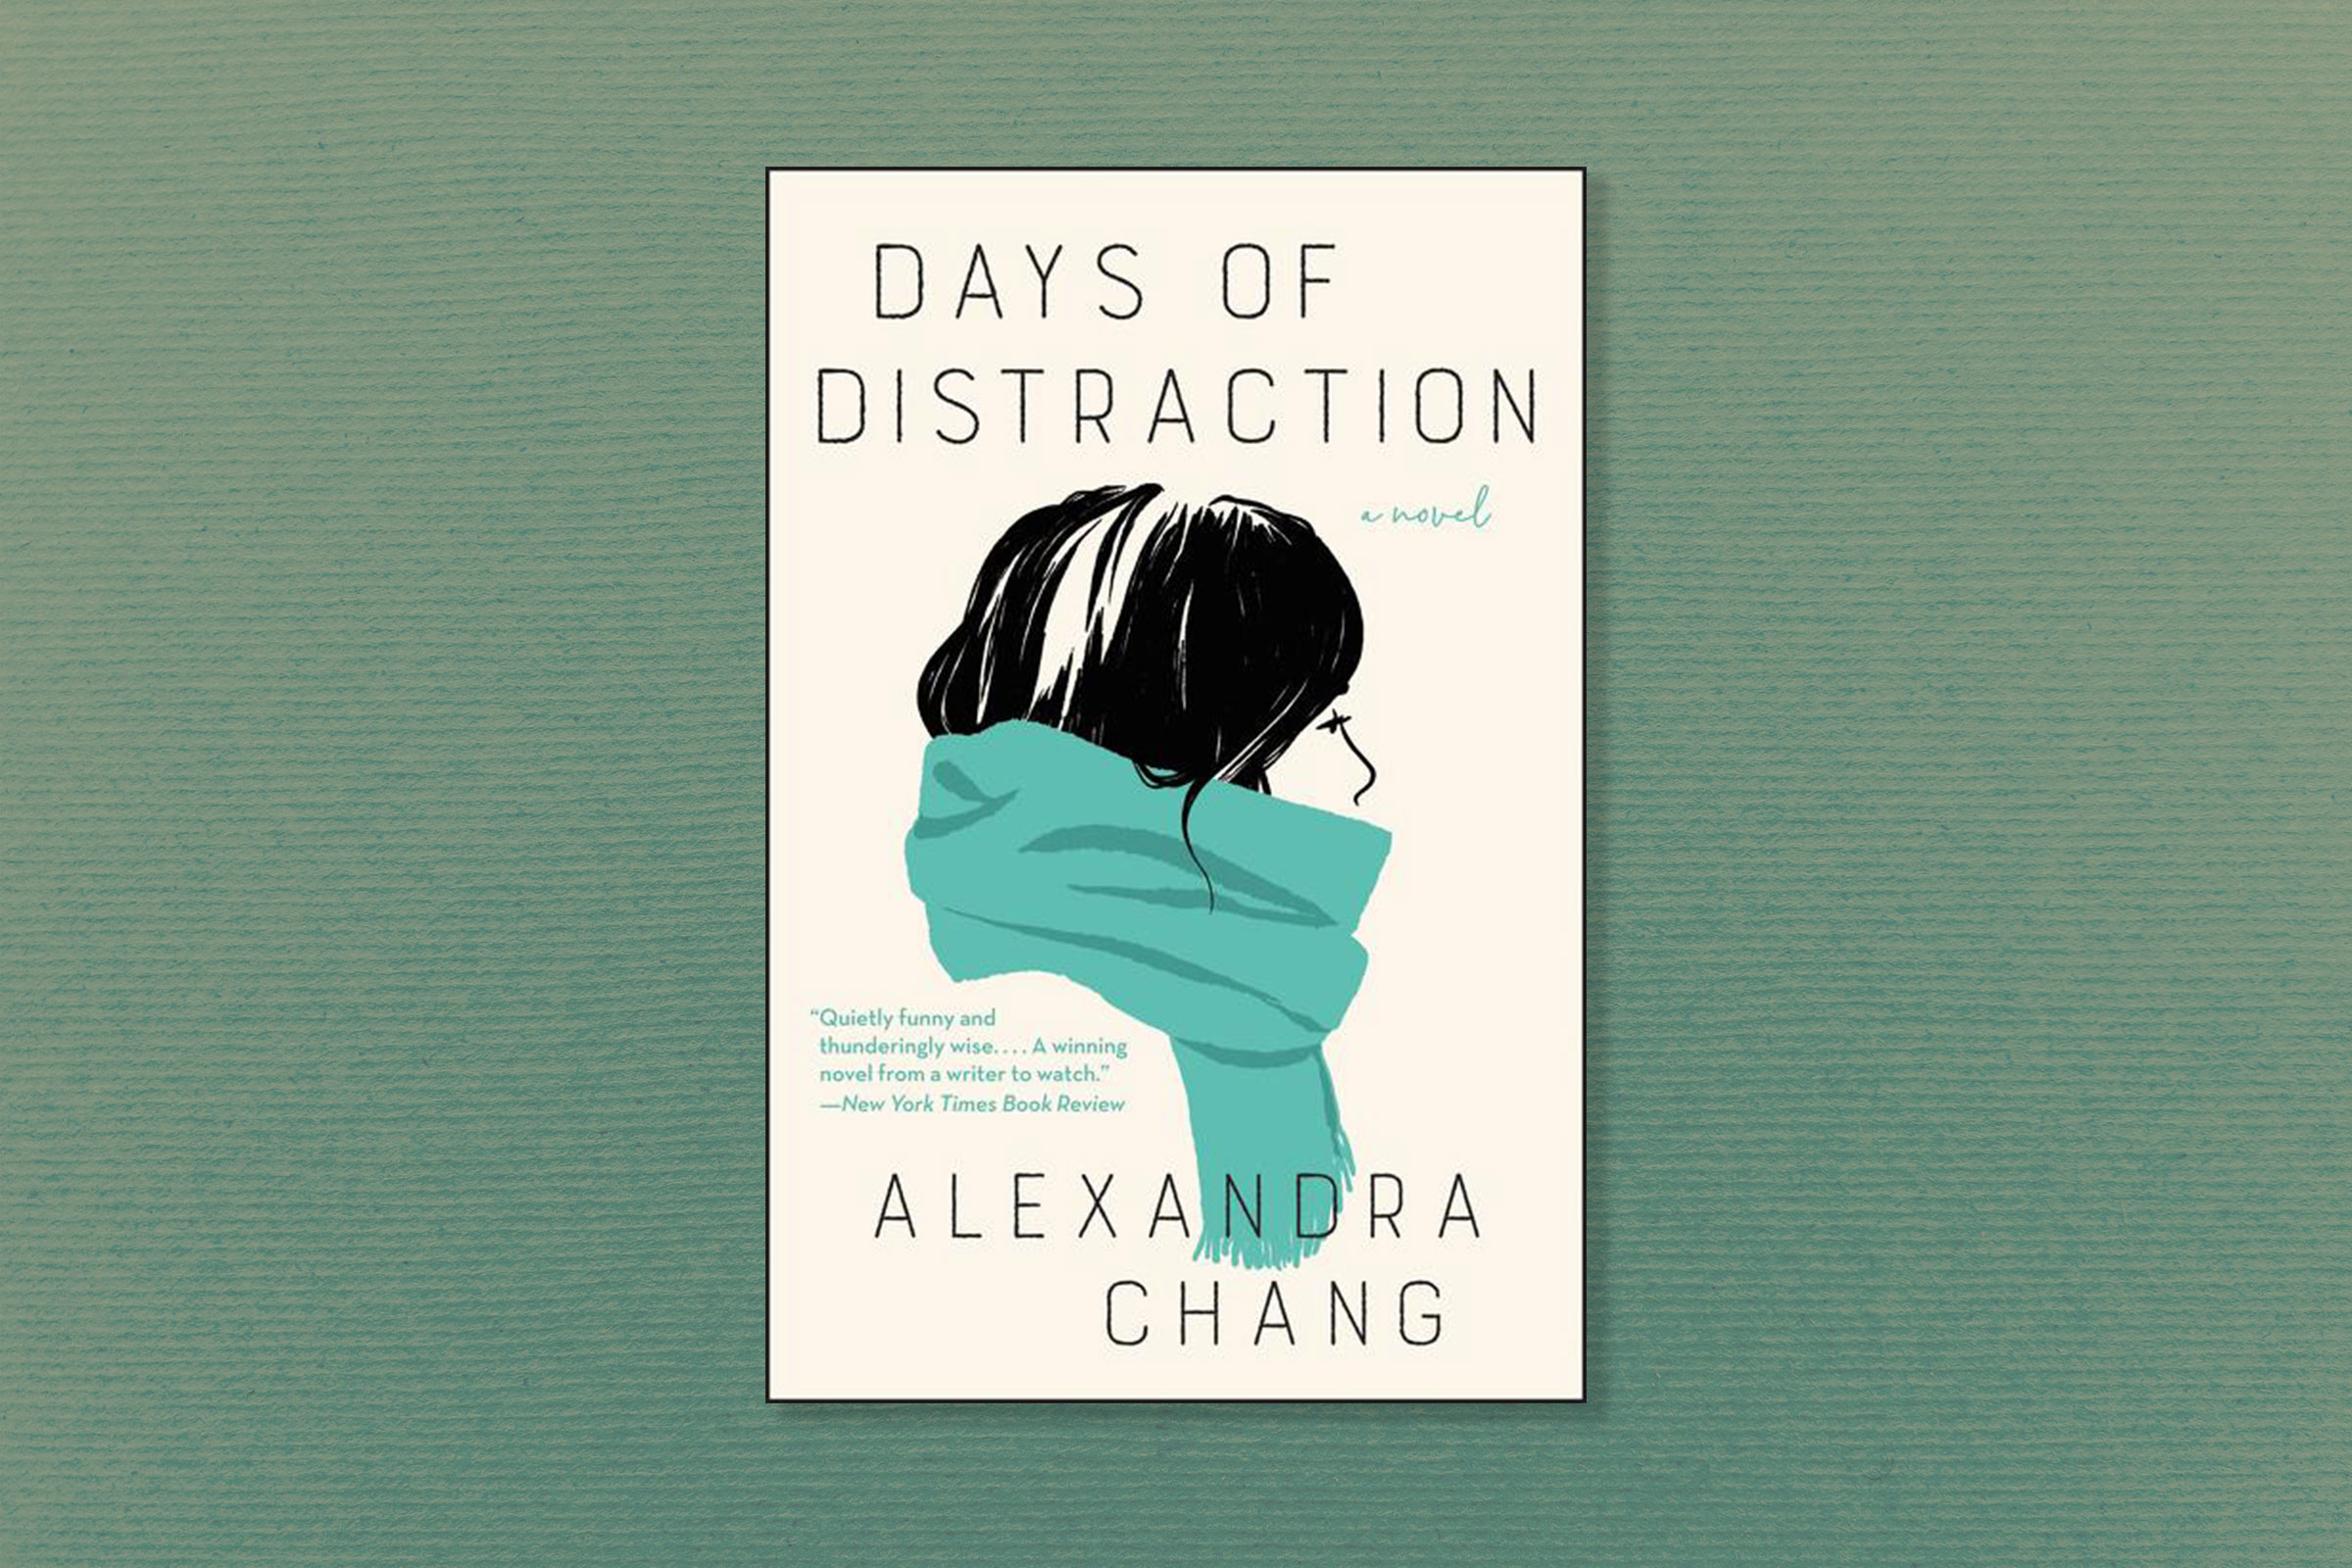 Days of Distraction, by Alexandra Chang